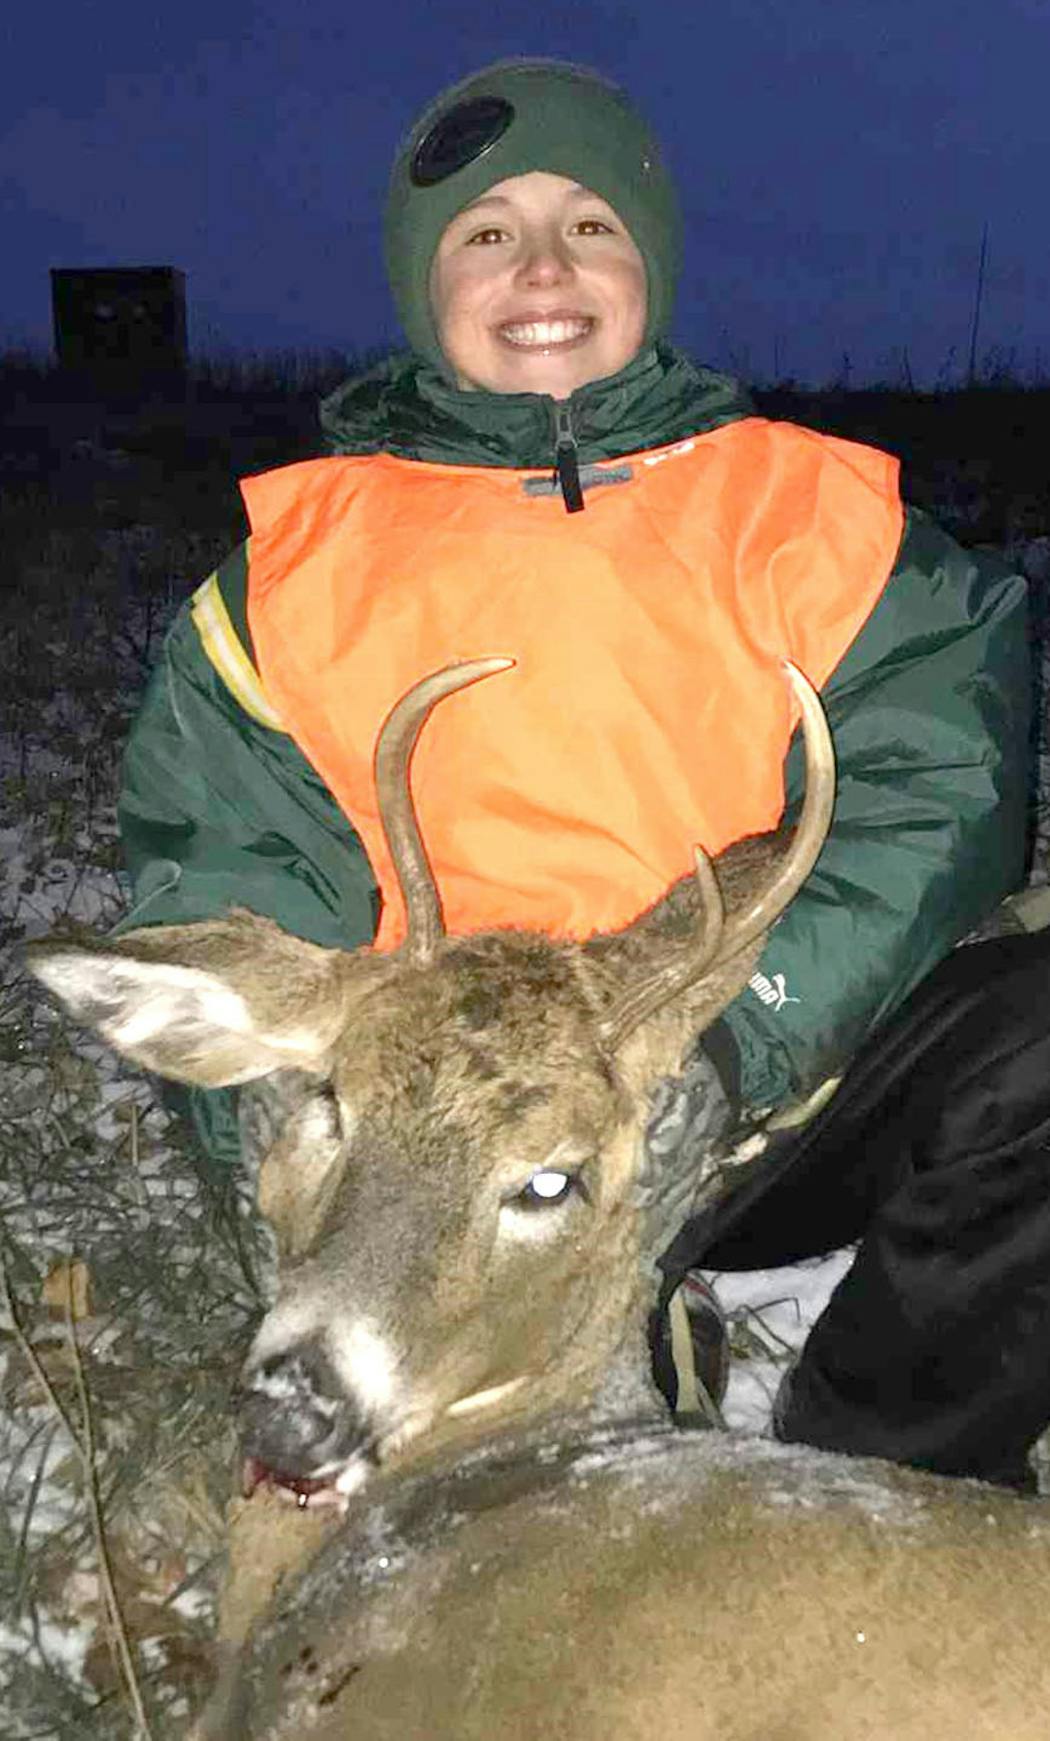 Cade Wozney, 12, of Prior Lake, with the first buck of his life. He was with his father, Bill, in a heated stand in Buffalo County, Wis., when a doe stepped into a food plot. Cade waited and the buck followed. He dropped him with one 50-yard shot.